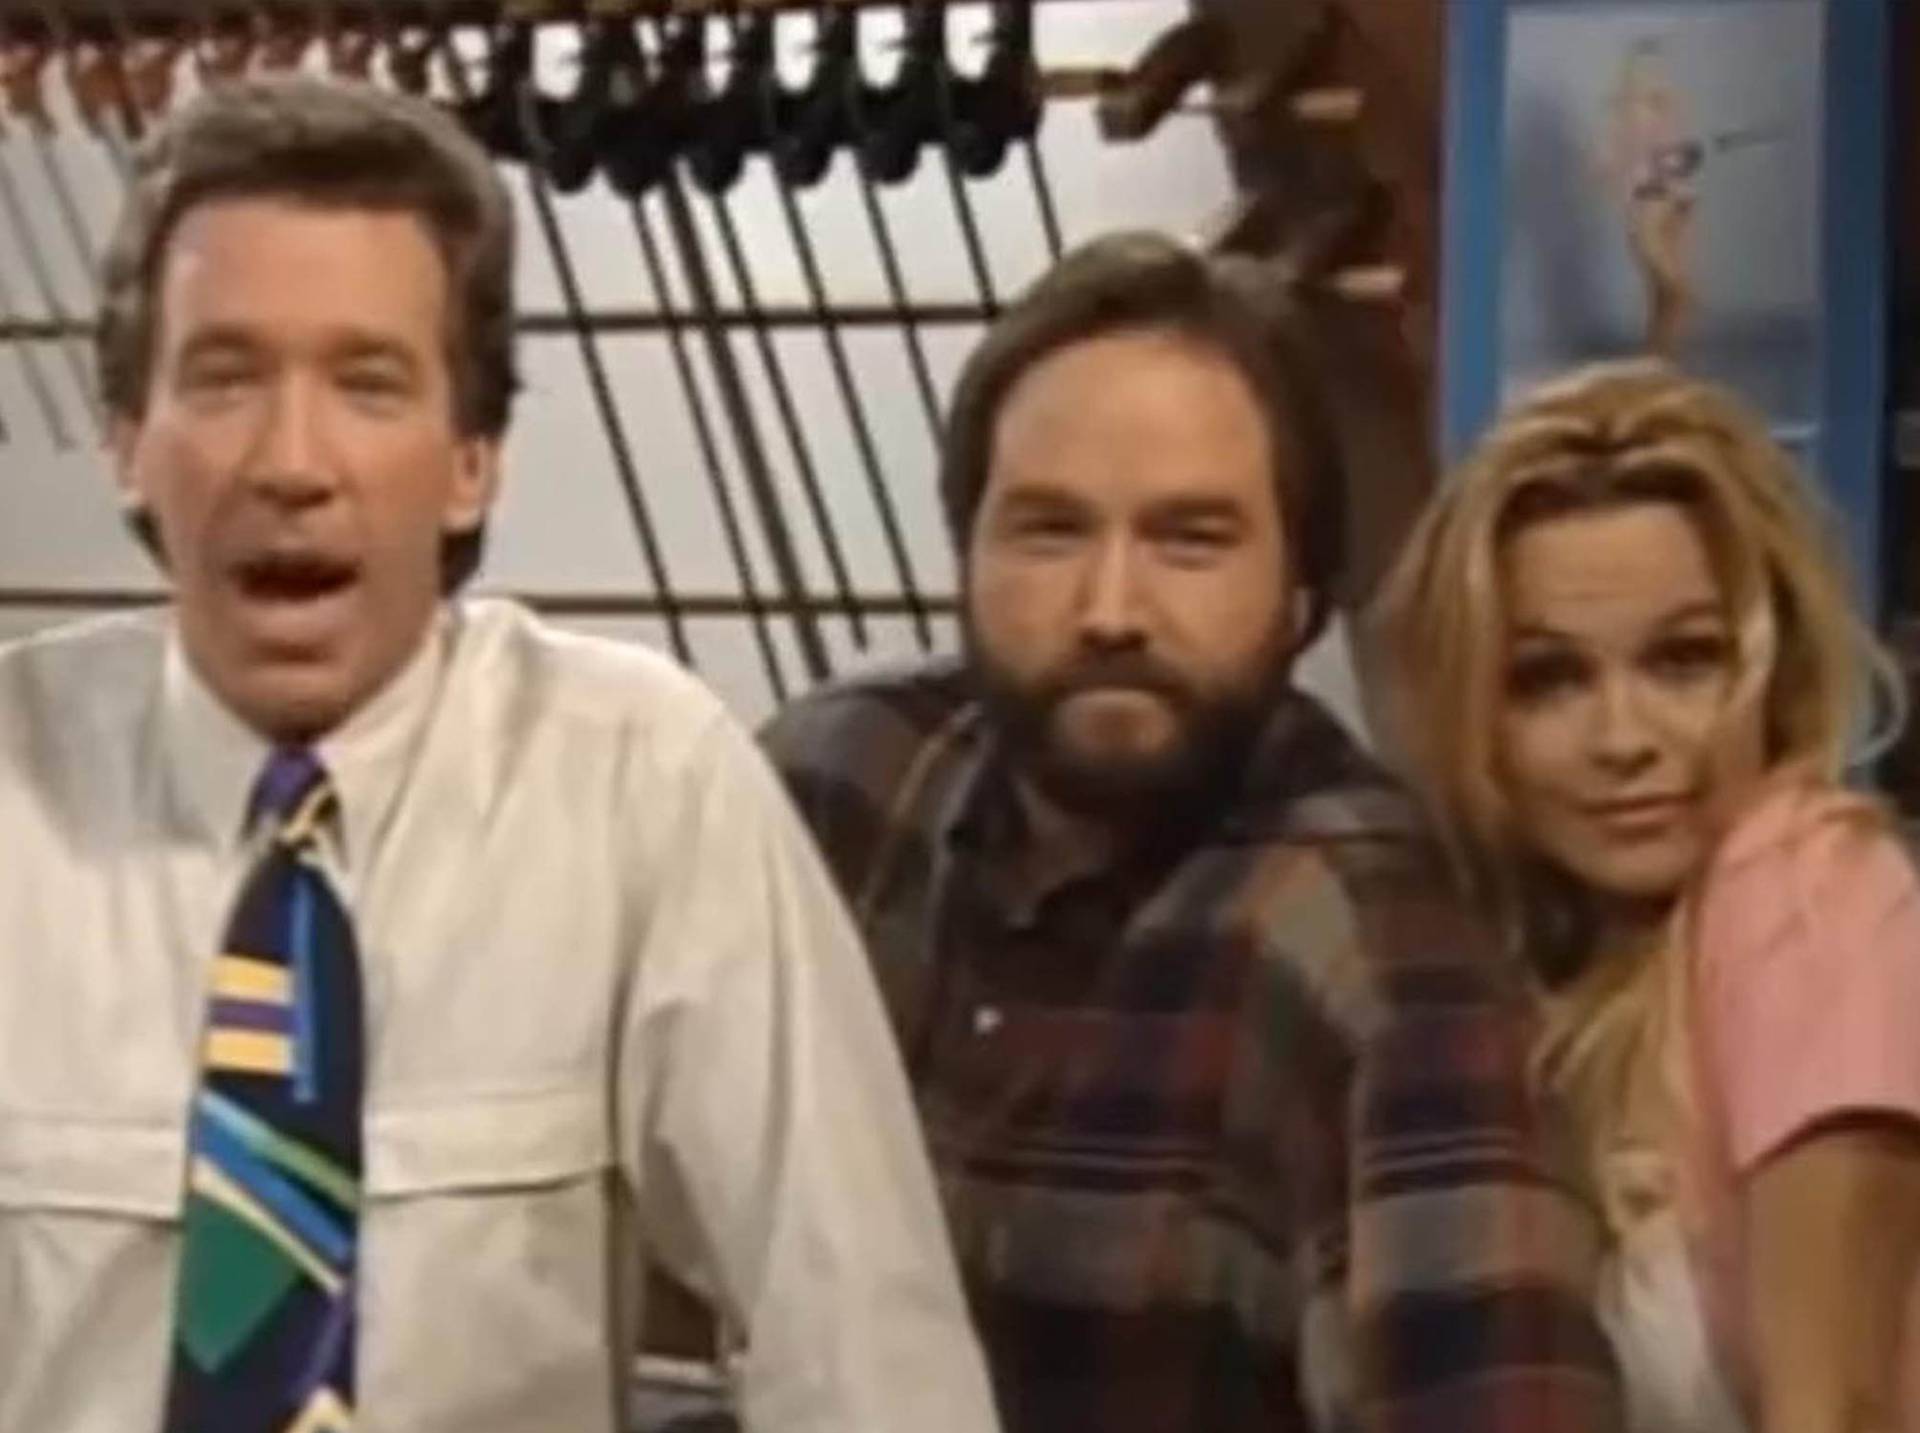 Pamela Anderson made a cameo appearance on the TV show "Home Improvement".